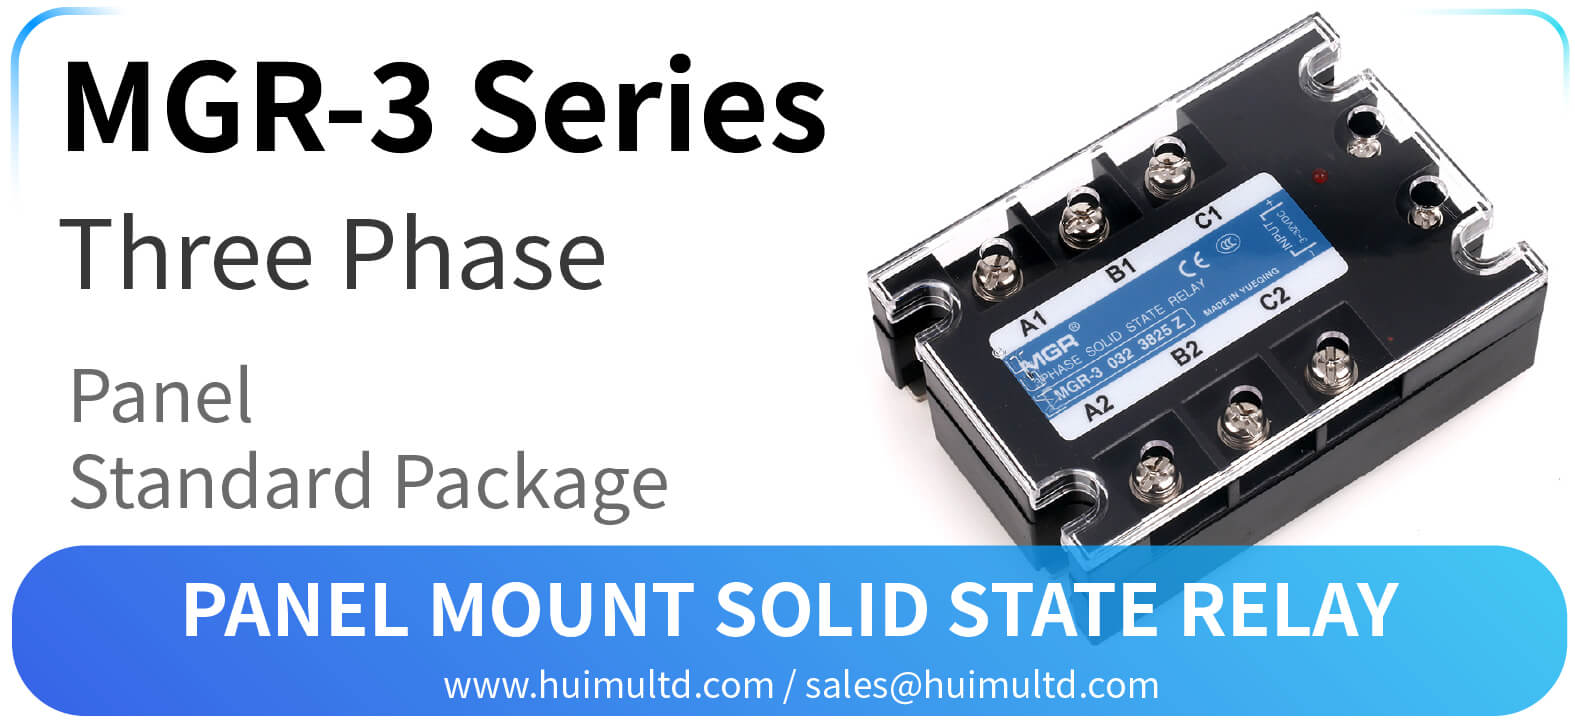 MGR-3 Series Panel Mount Solid State Relay